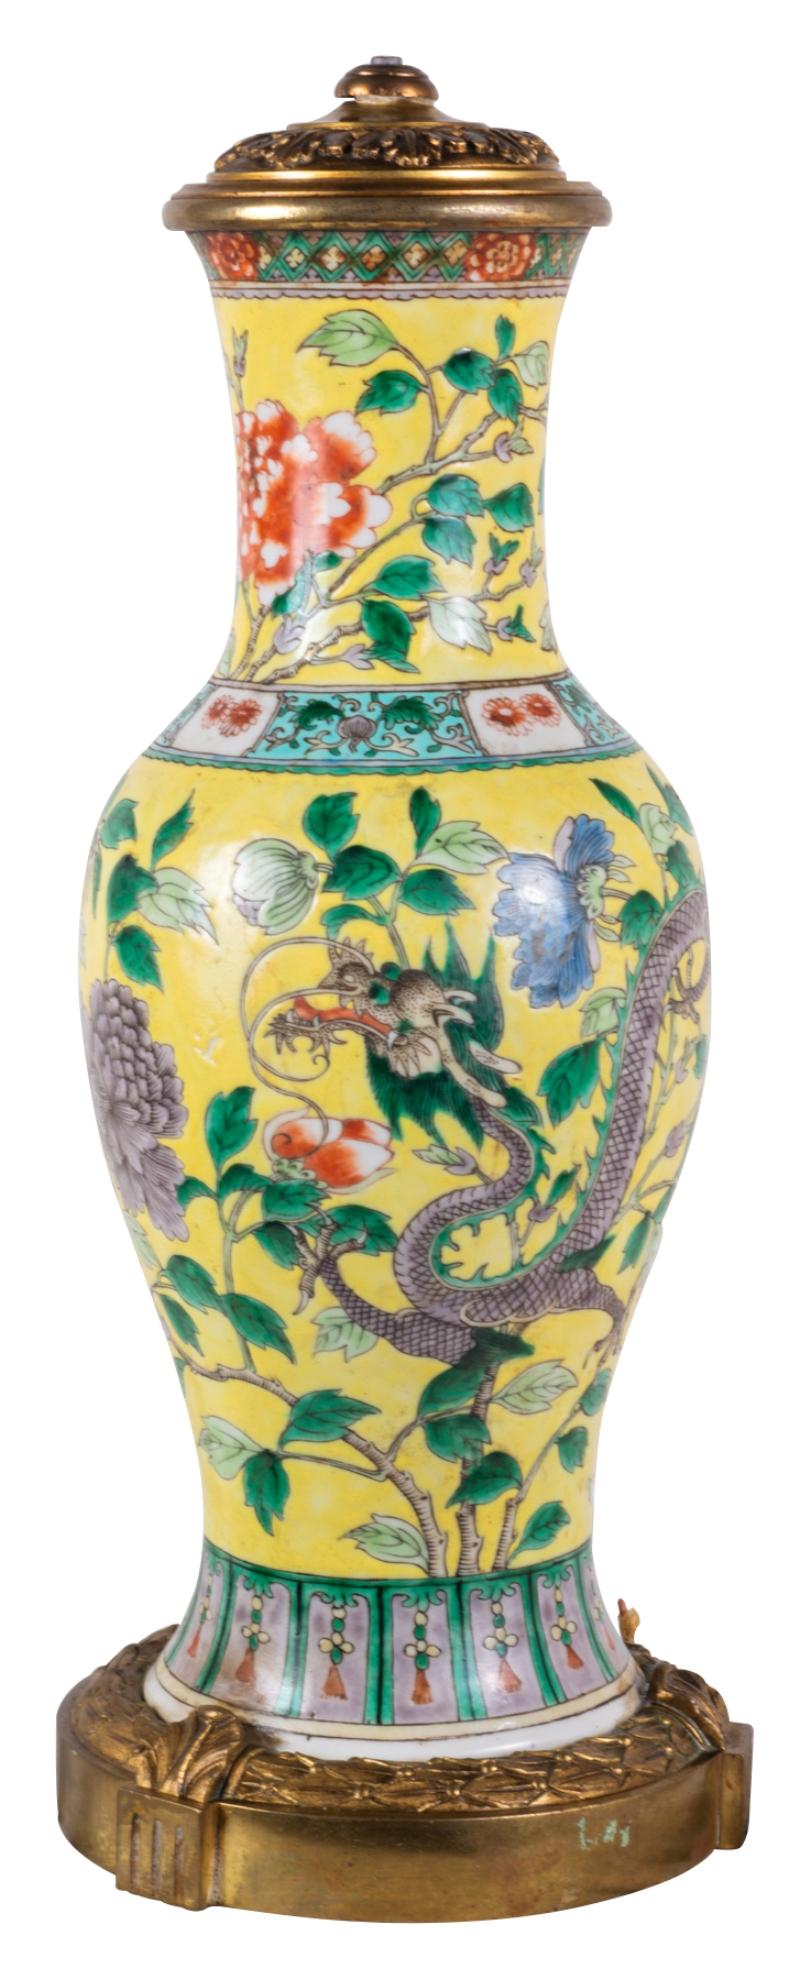 A striking 19th century Chinese Famille Jaune vase / lamp. Having a wonderful Yellow ground with classical motif boarders, exotic floral decoration surrounding a mythical dragon. Mounted on a classical gilded ormolu base.